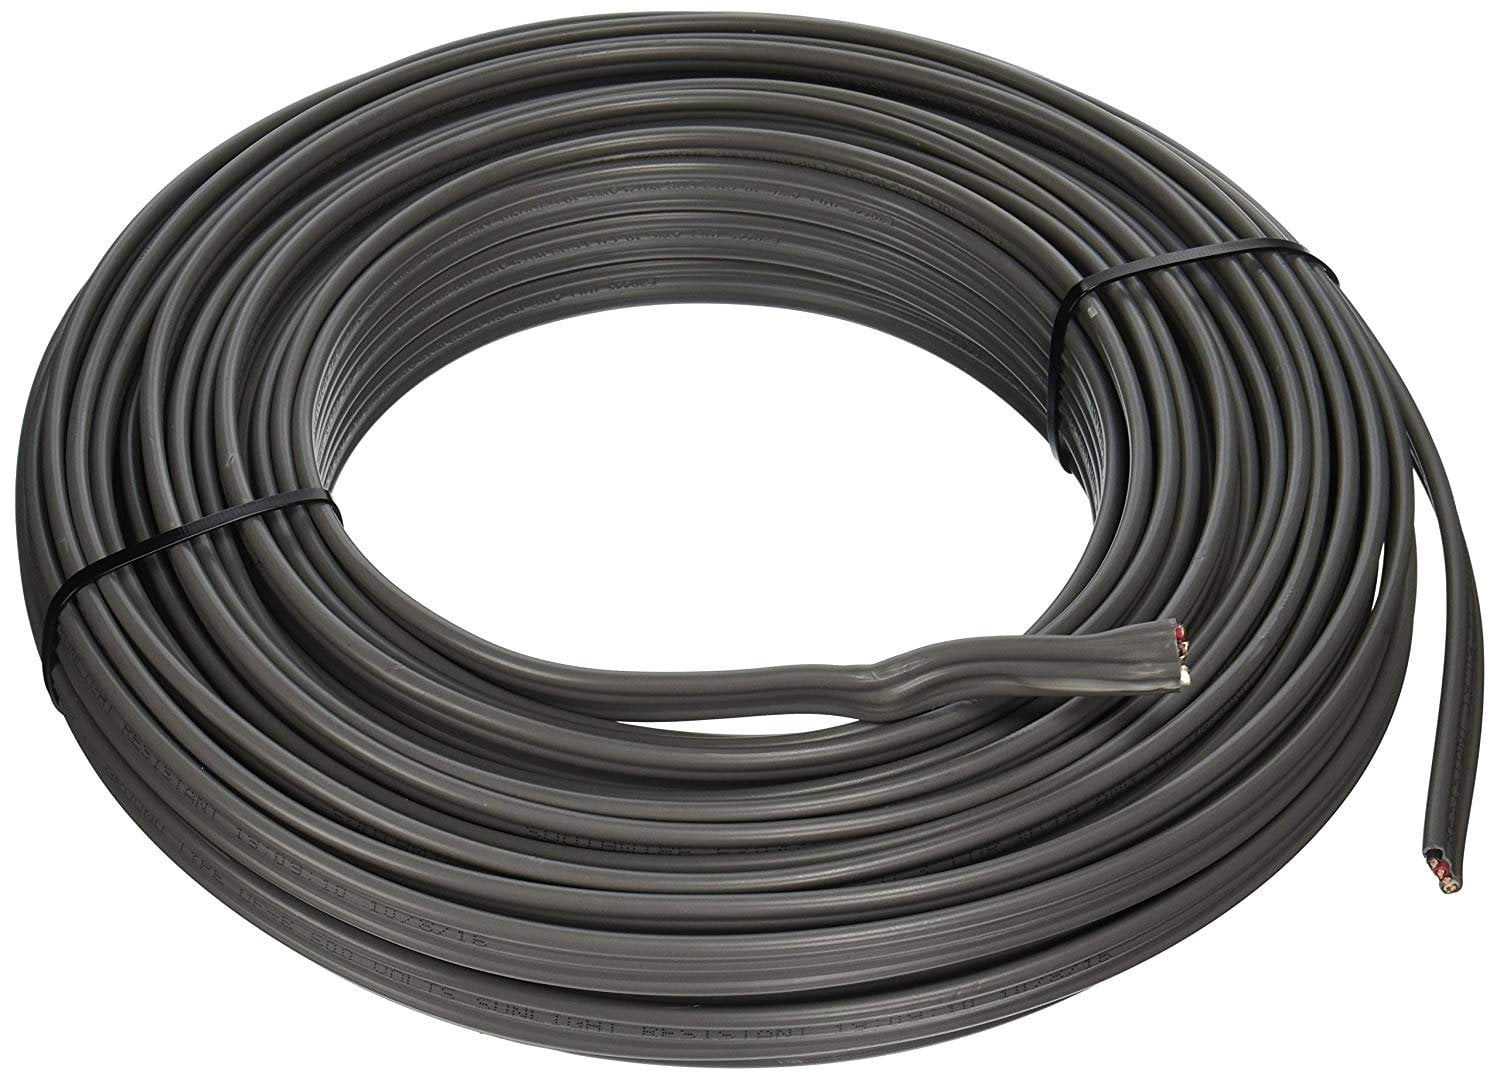 12/3 W/GR 100' FT UF-B OUTDOOR DIRECT BURIAL/SUNLIGHT RESISTANT ELECTRICAL WIRE 